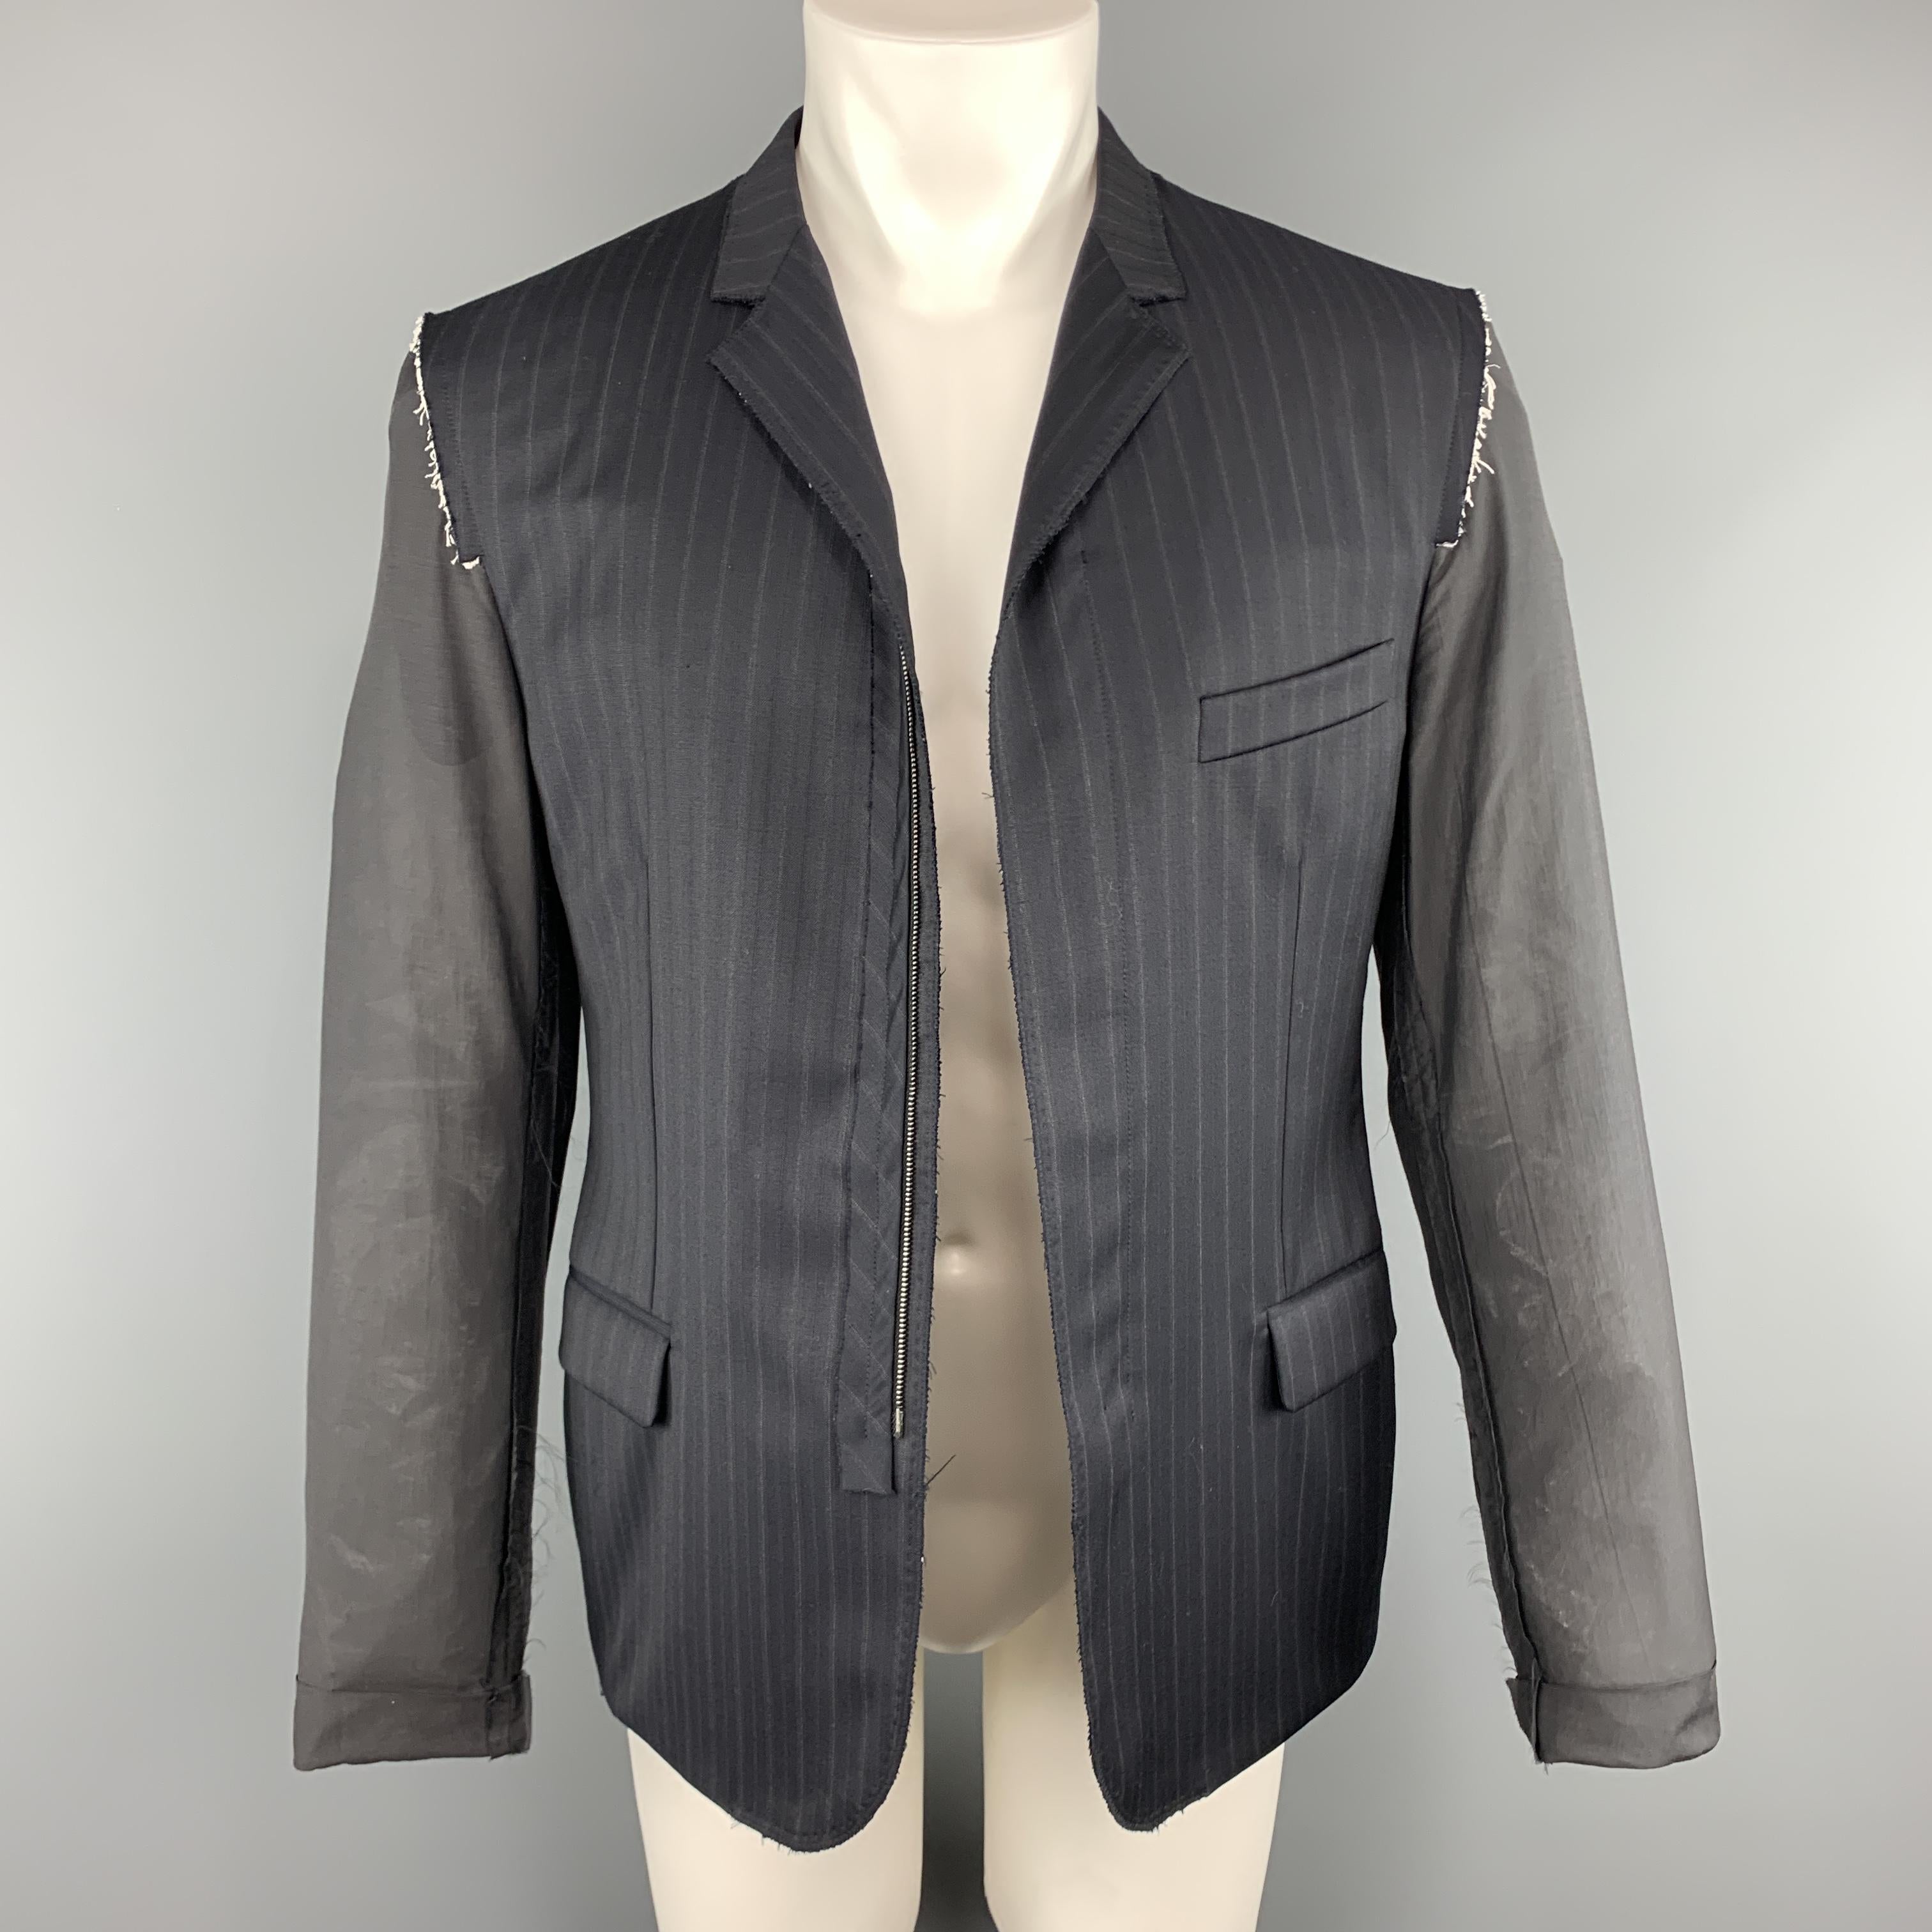 LANVIN sport coat features a navy striped front with notch lapel and hidden placket zip closure with sheer charcoal sleeves and back. Made in Italy.
 
Excellent Pre-Owned Condition.
Marked: IT 50
 
Measurements:
 
Shoulder: 18 in.
Chest: 42